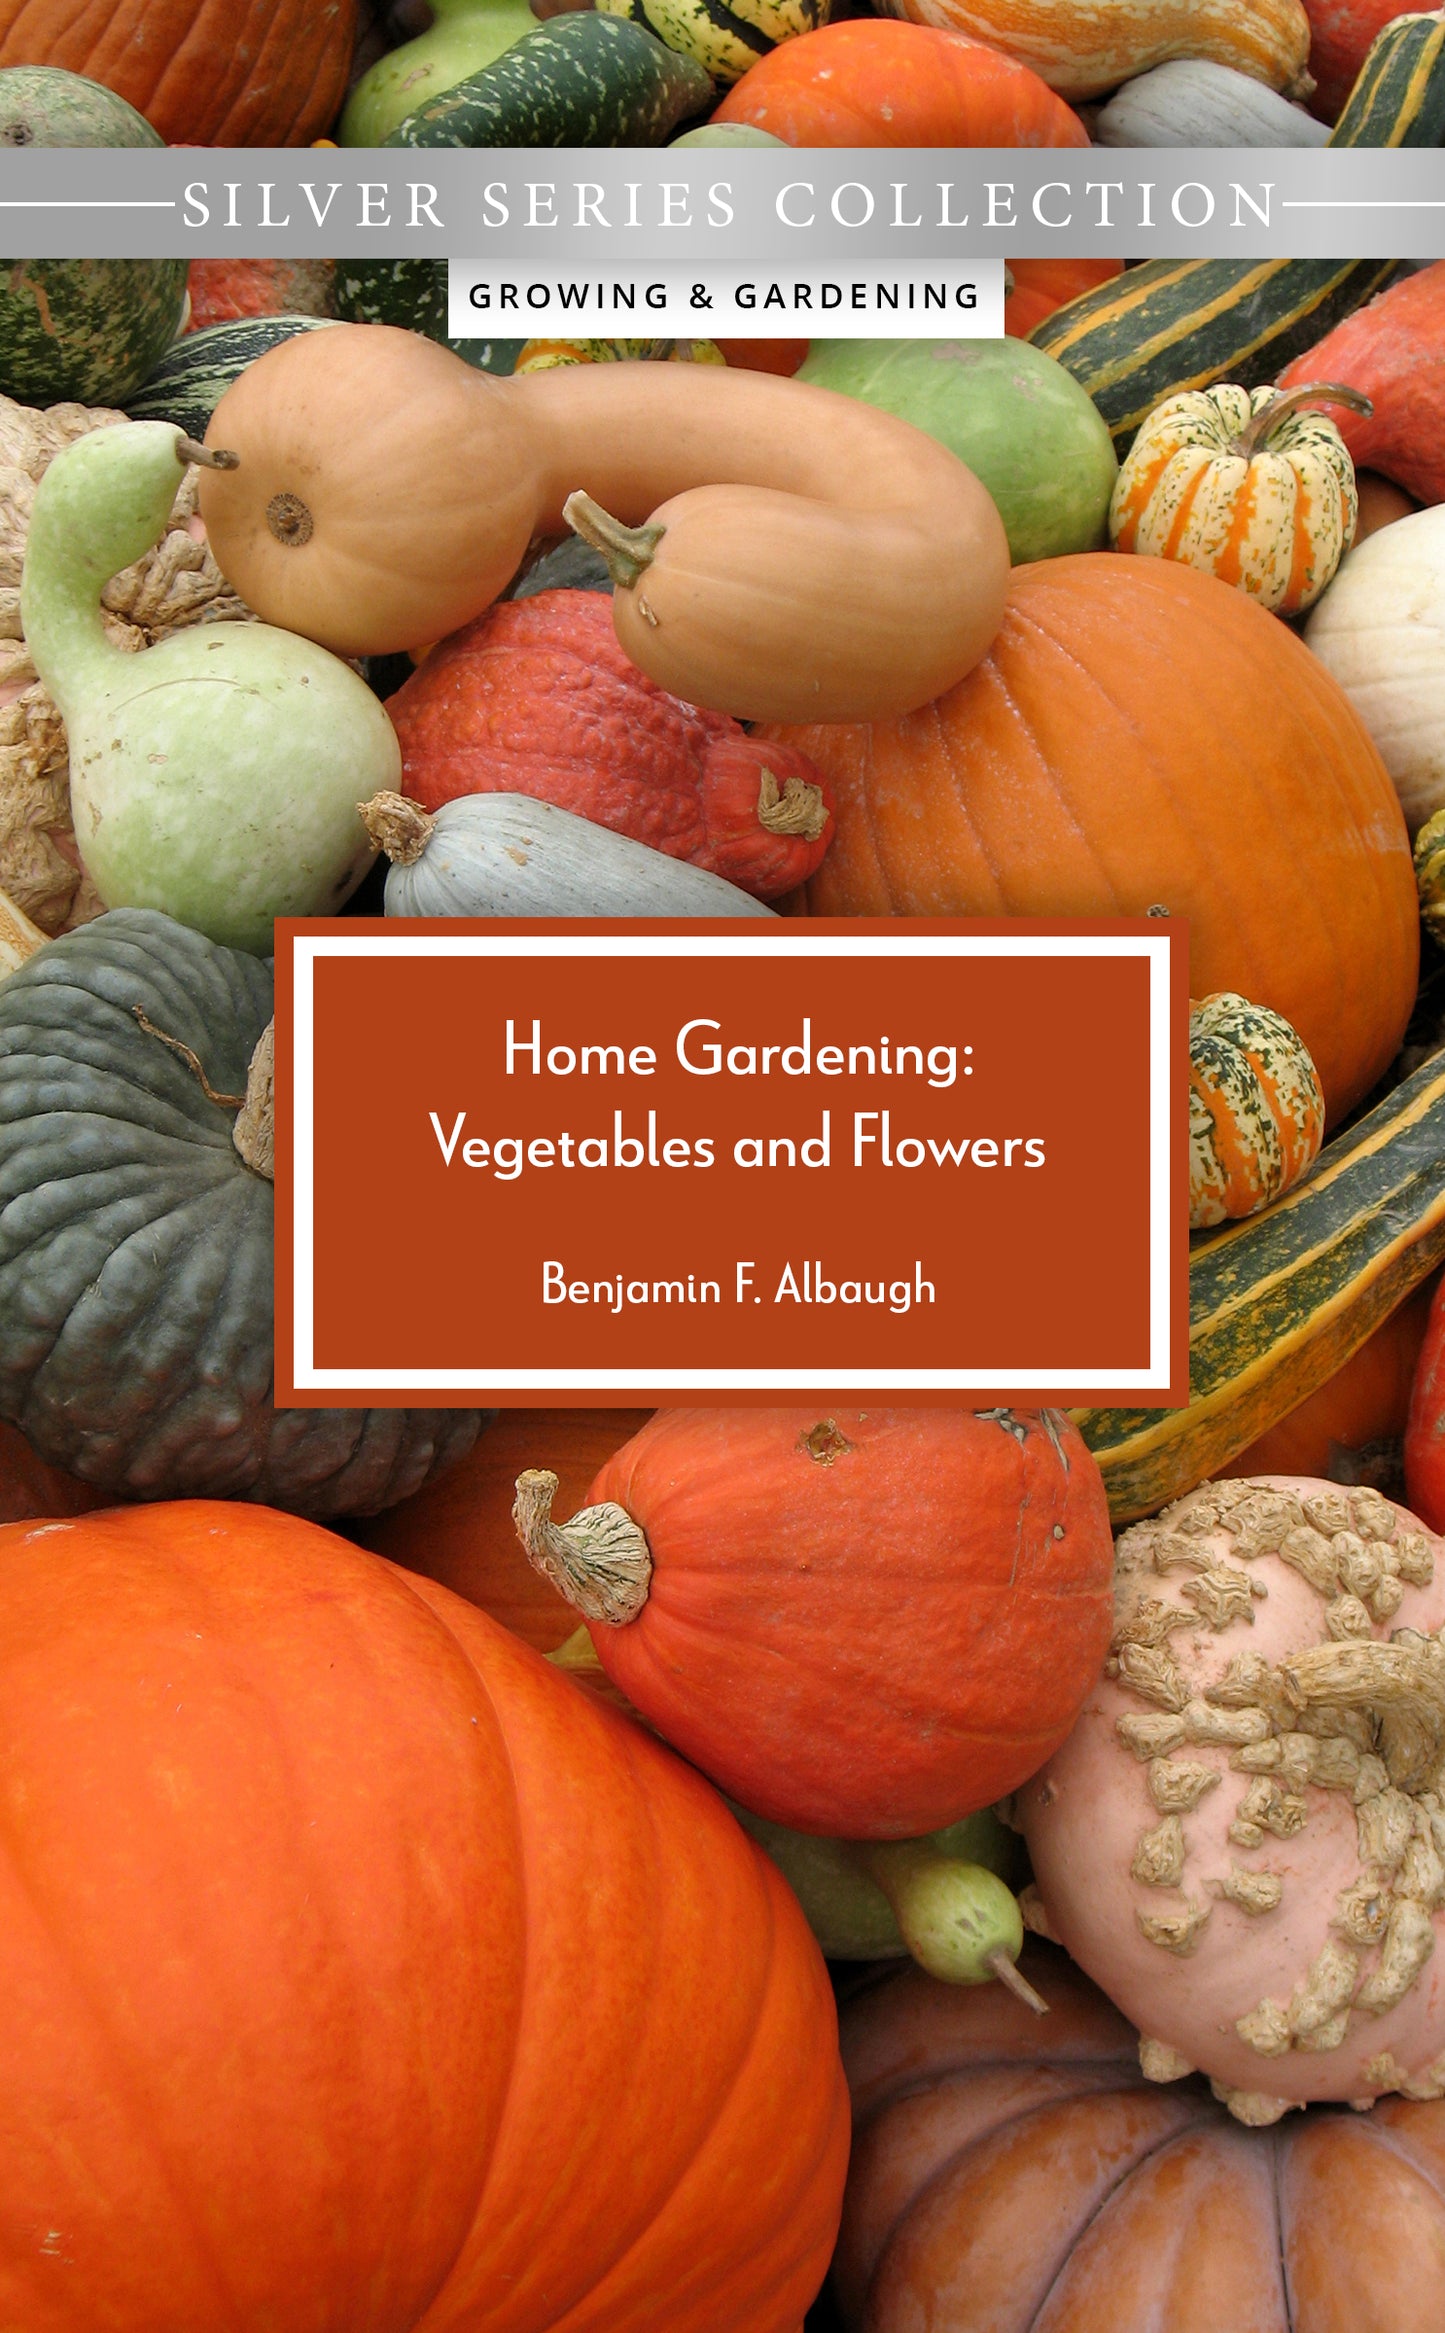 Home Gardening: Vegetables and Flowers